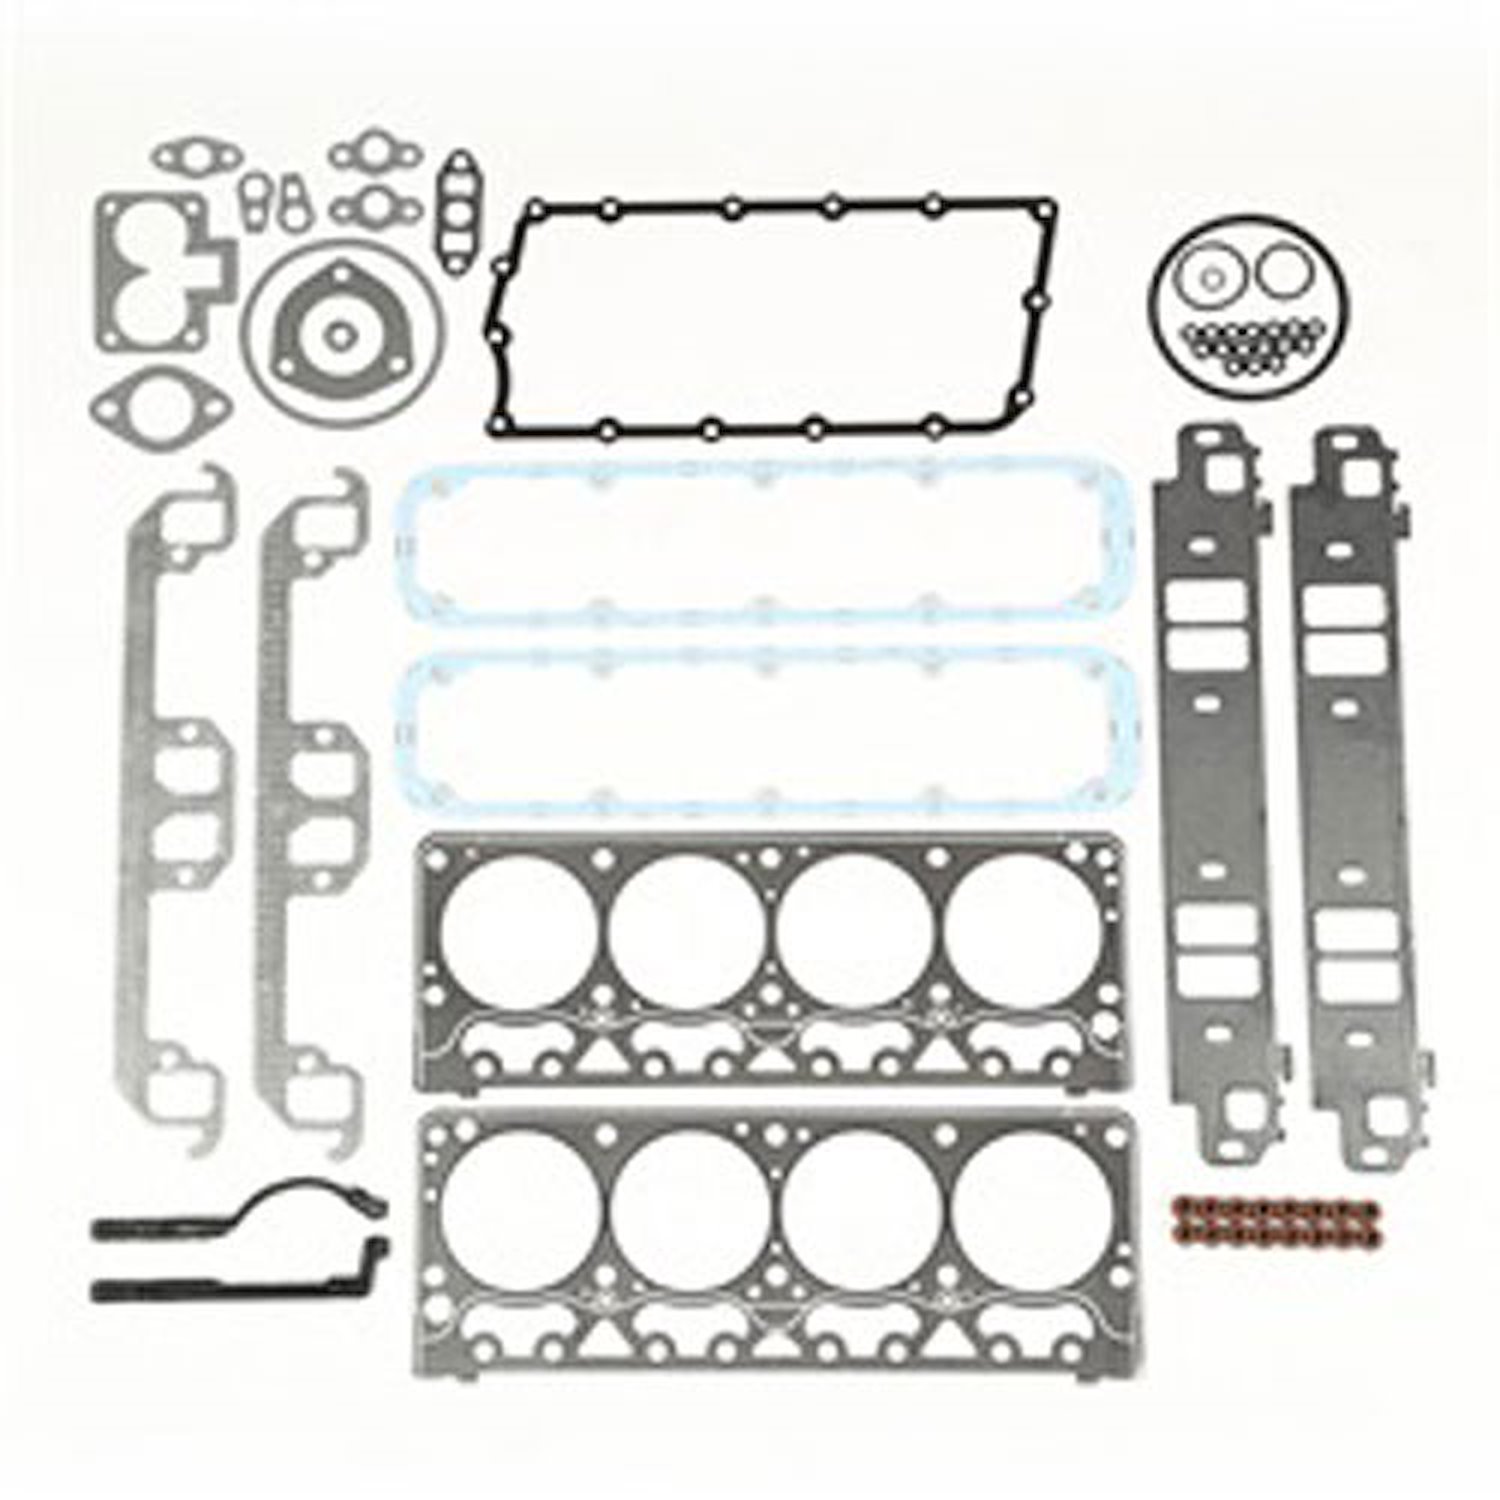 This upper engine gasket set from Omix-ADA fits 5.9L engines found in 97-98 Jeep Grand Cherokee.